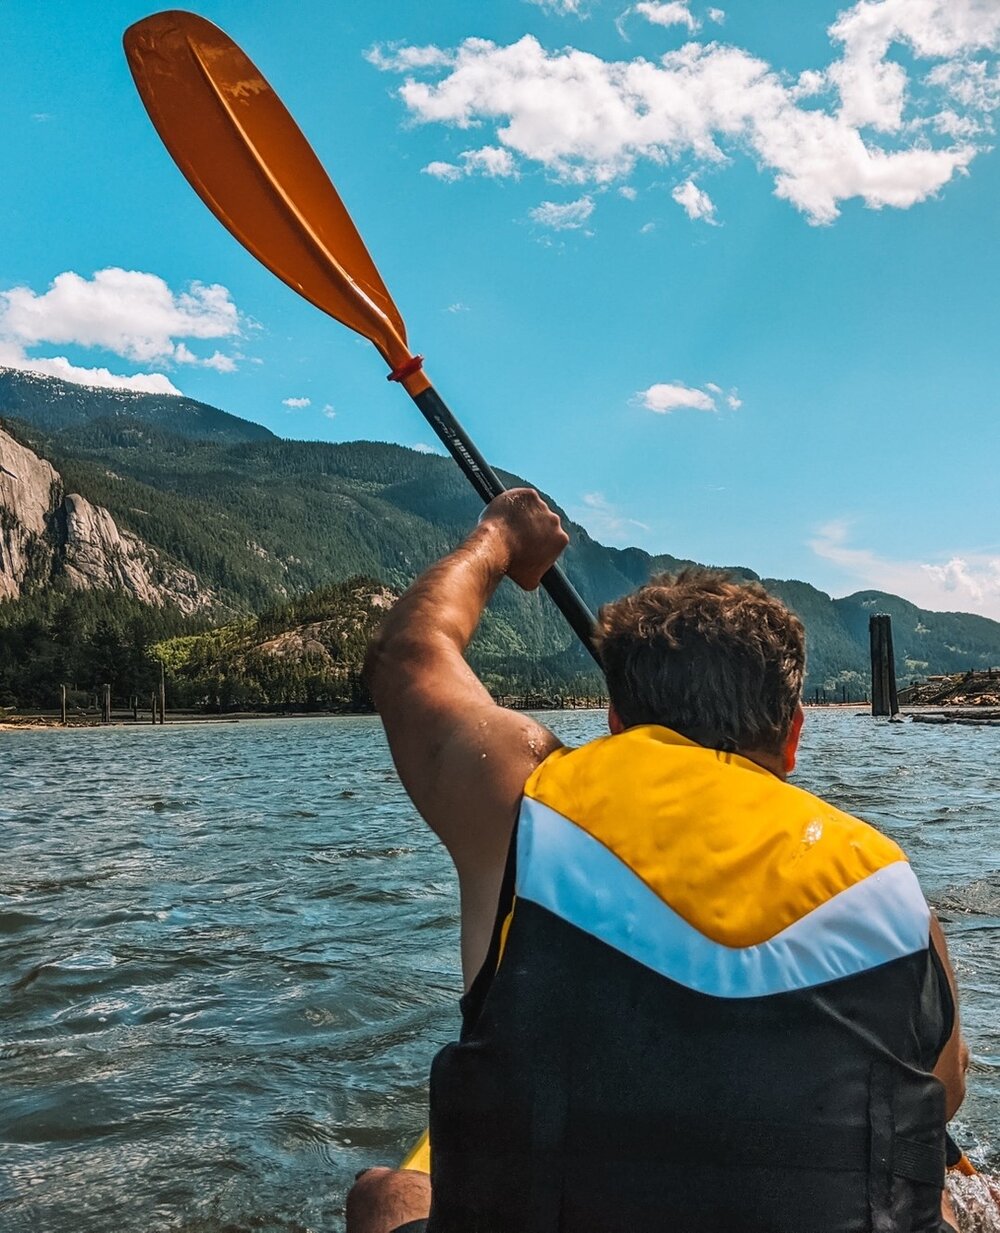 Today is a perfect day to head out for a paddle! Come see our Rentals guy Conrad from 11:00 AM to 7:00 PM and head out on the water 🚣🏻⁠
~⁠
#SquamishAdventureInn #ExploreSquamish #SquamishTourism #Kayak #SeaToSky #BritishColumbia #MamquamBlindChanne